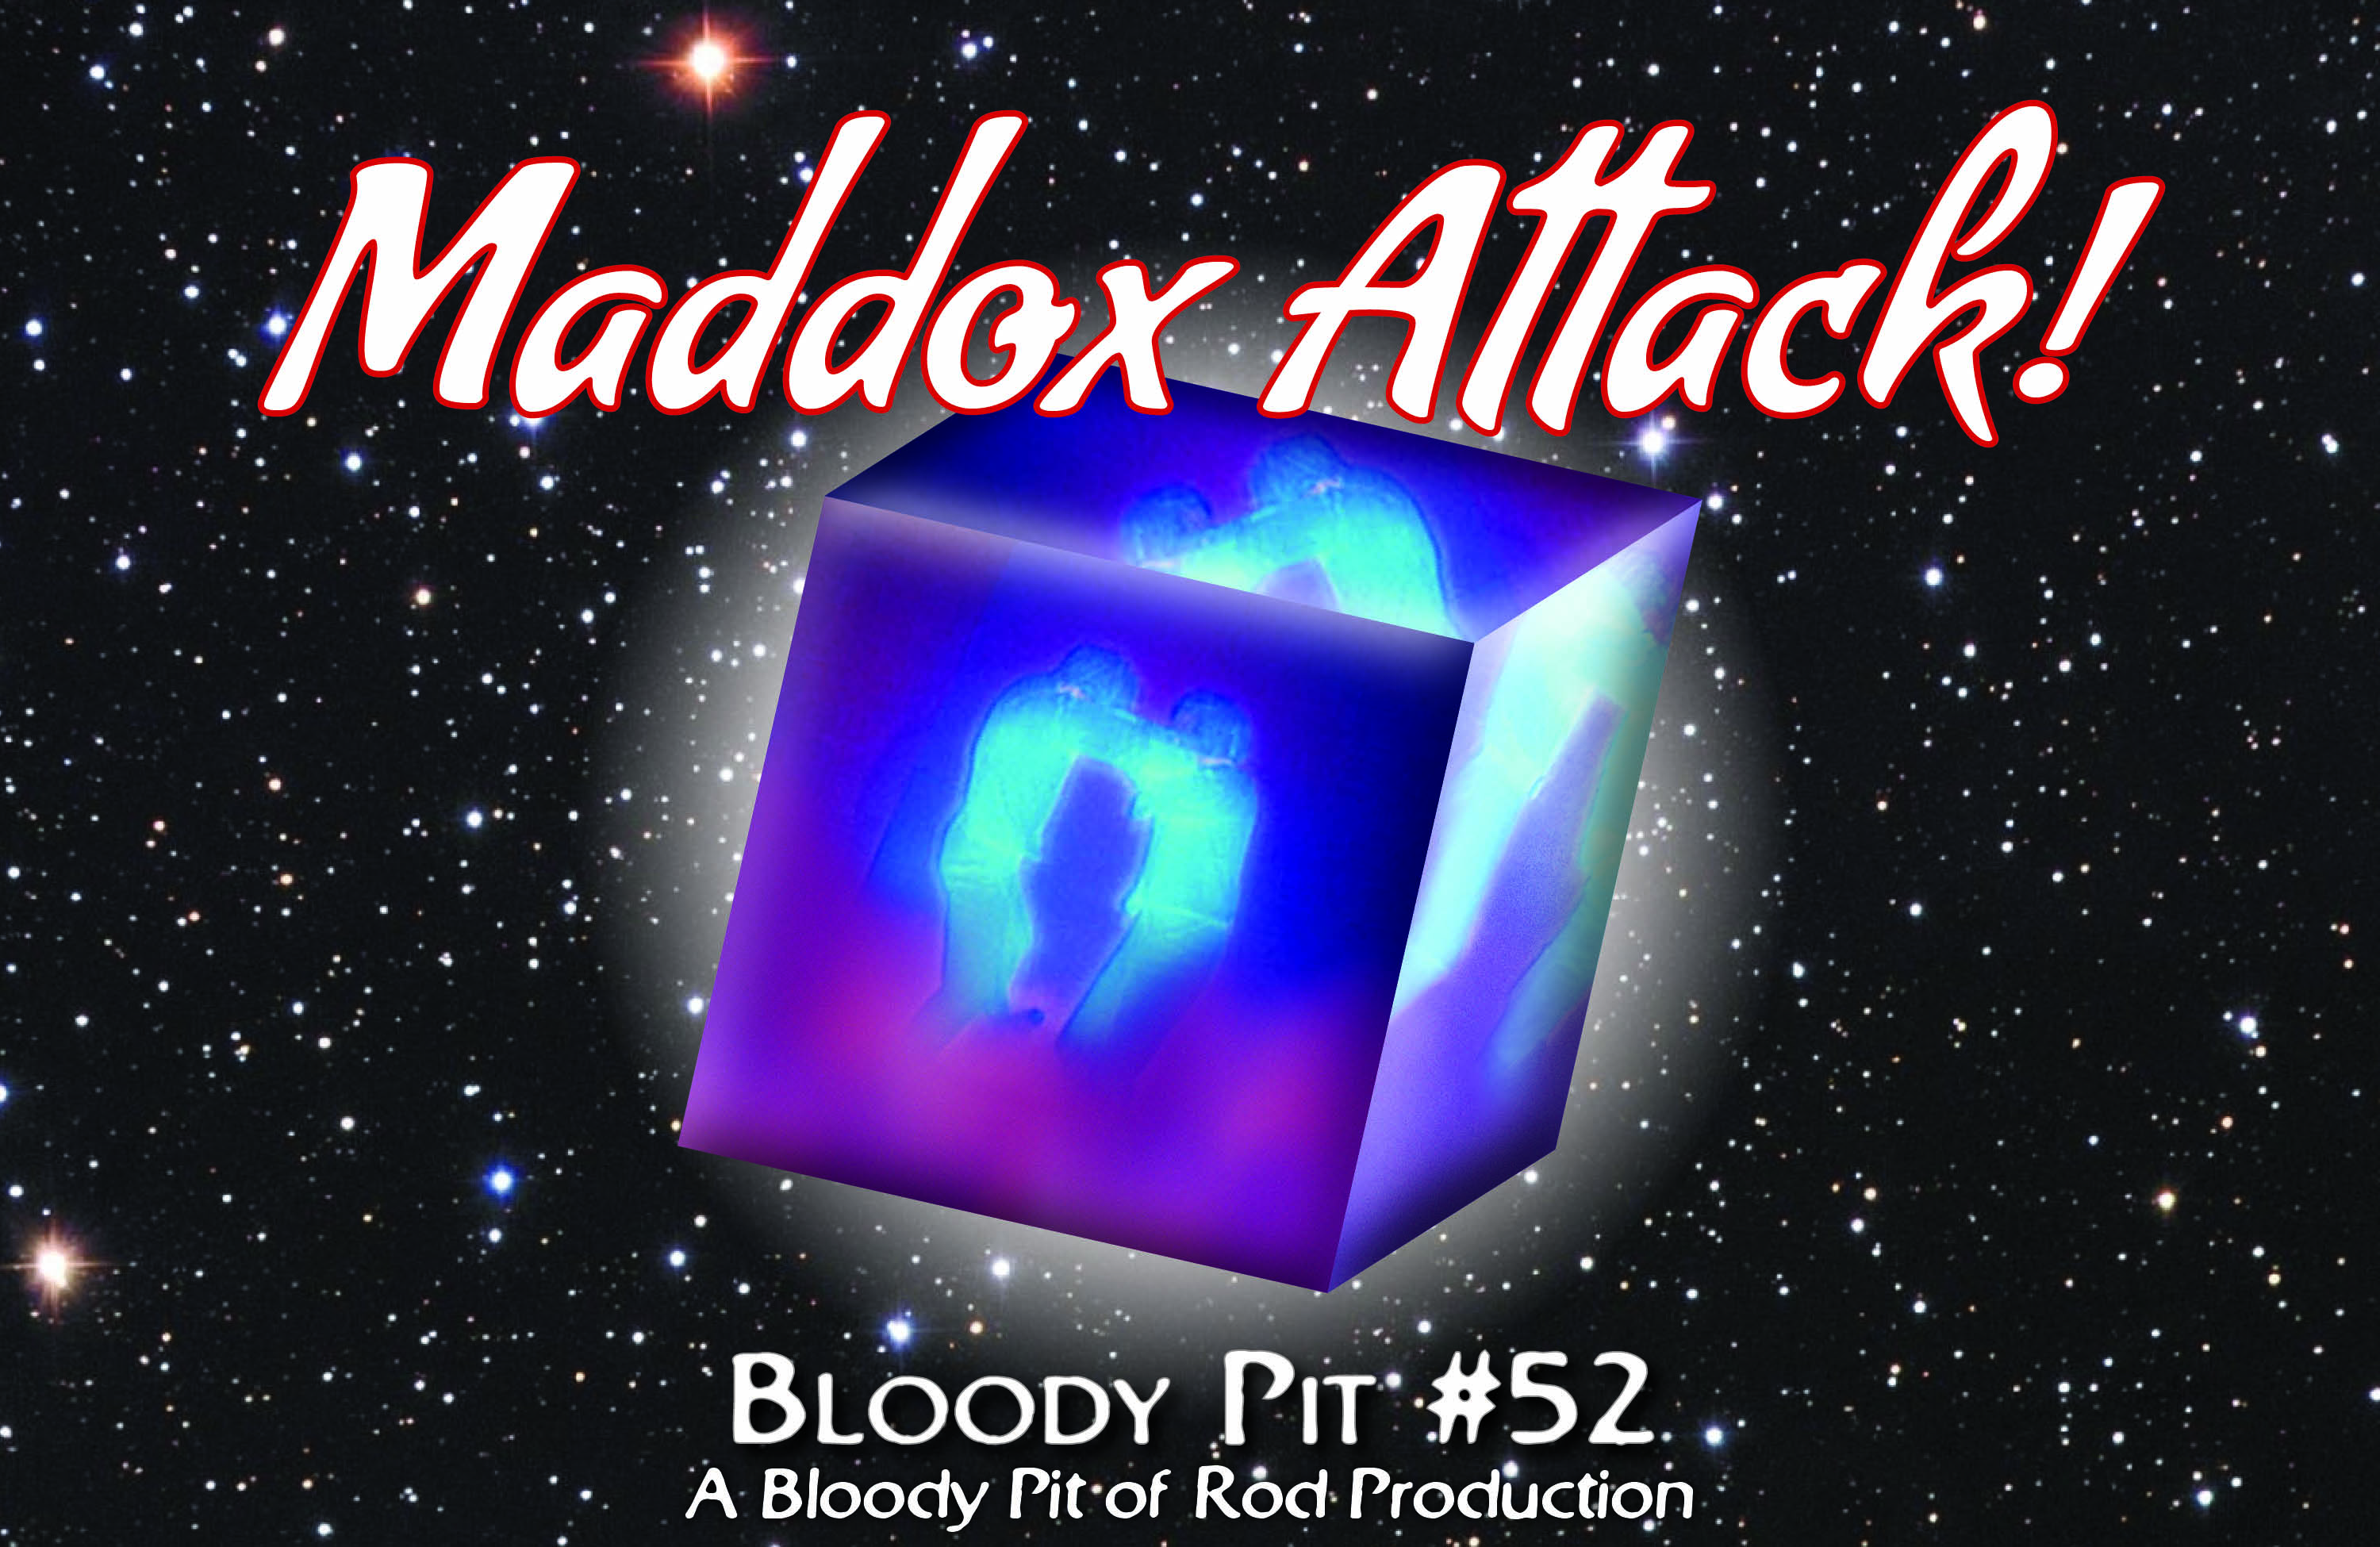 The Bloody Pit #52 - Maddox Attack! 